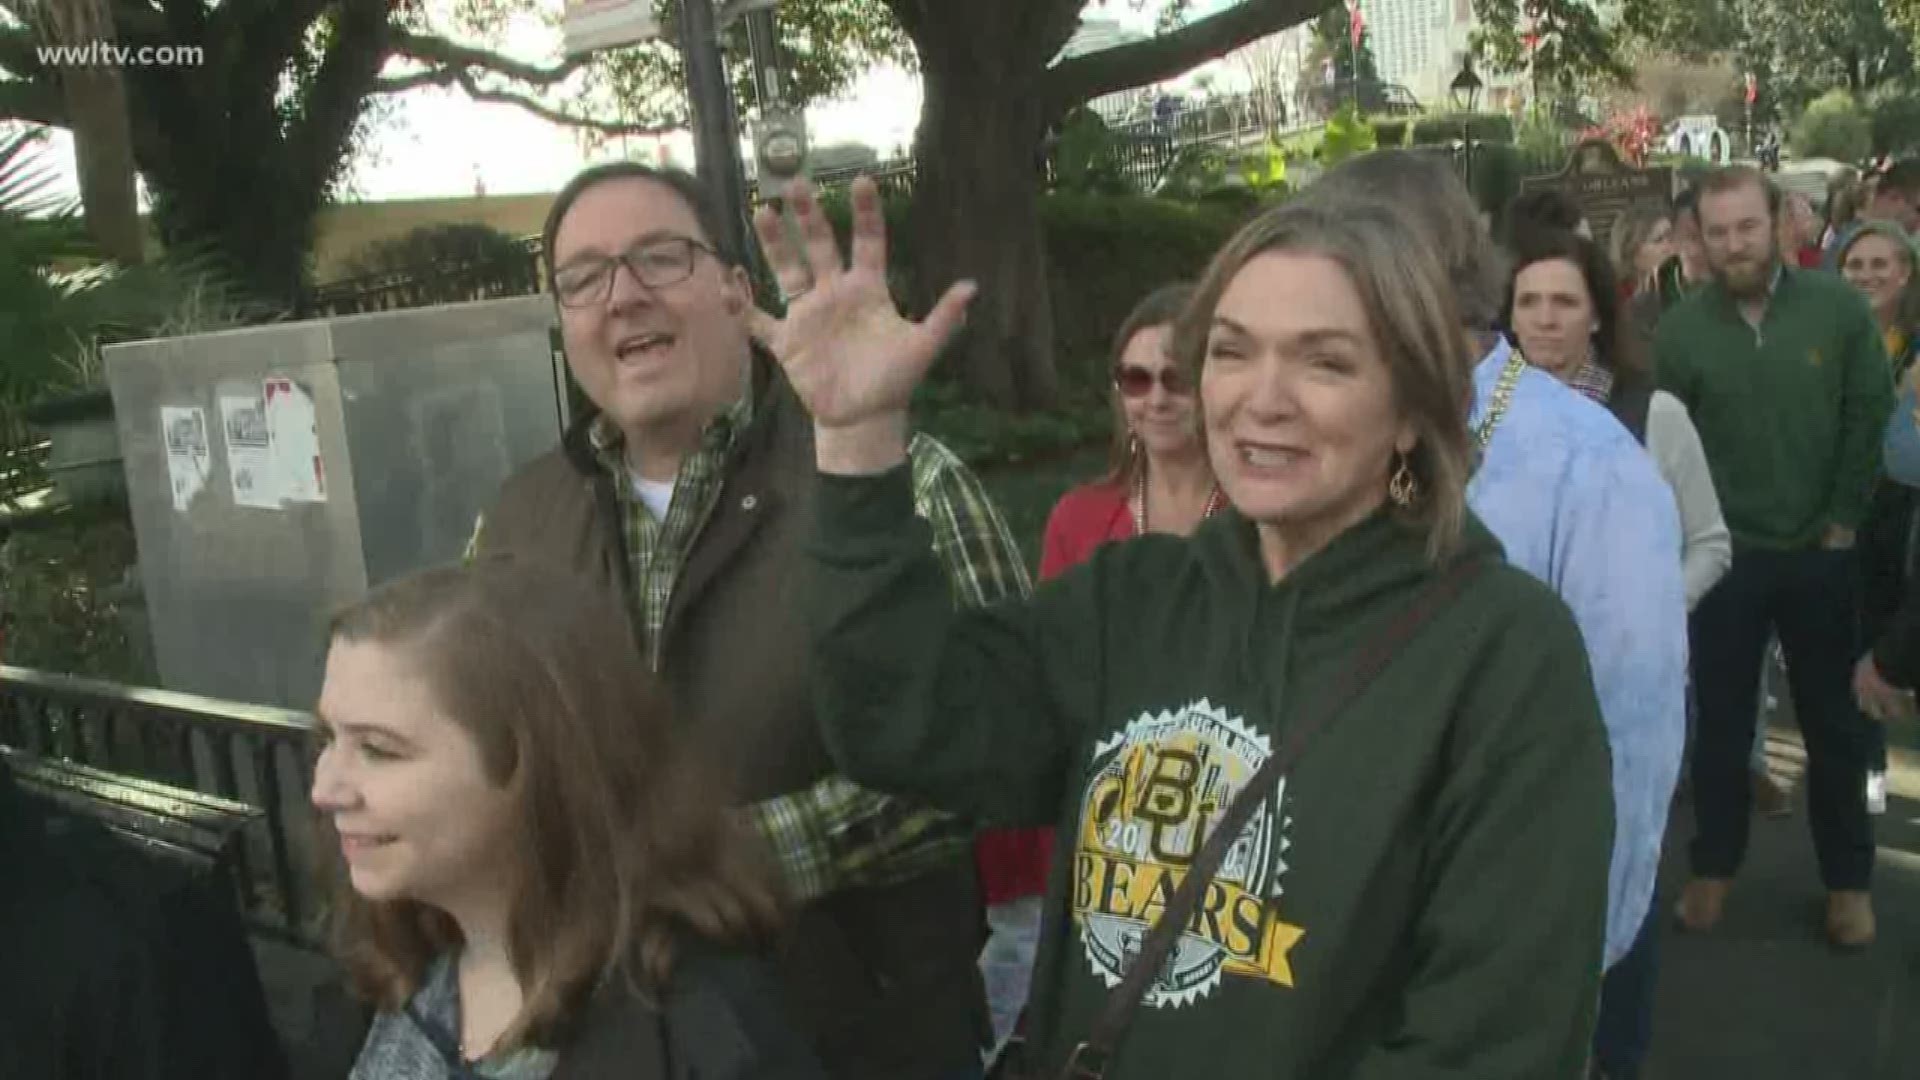 Fans for Baylor and Georgia explored New Orleans ahead of the Wednesday night's game in the Mercedes-Benz Superdome.